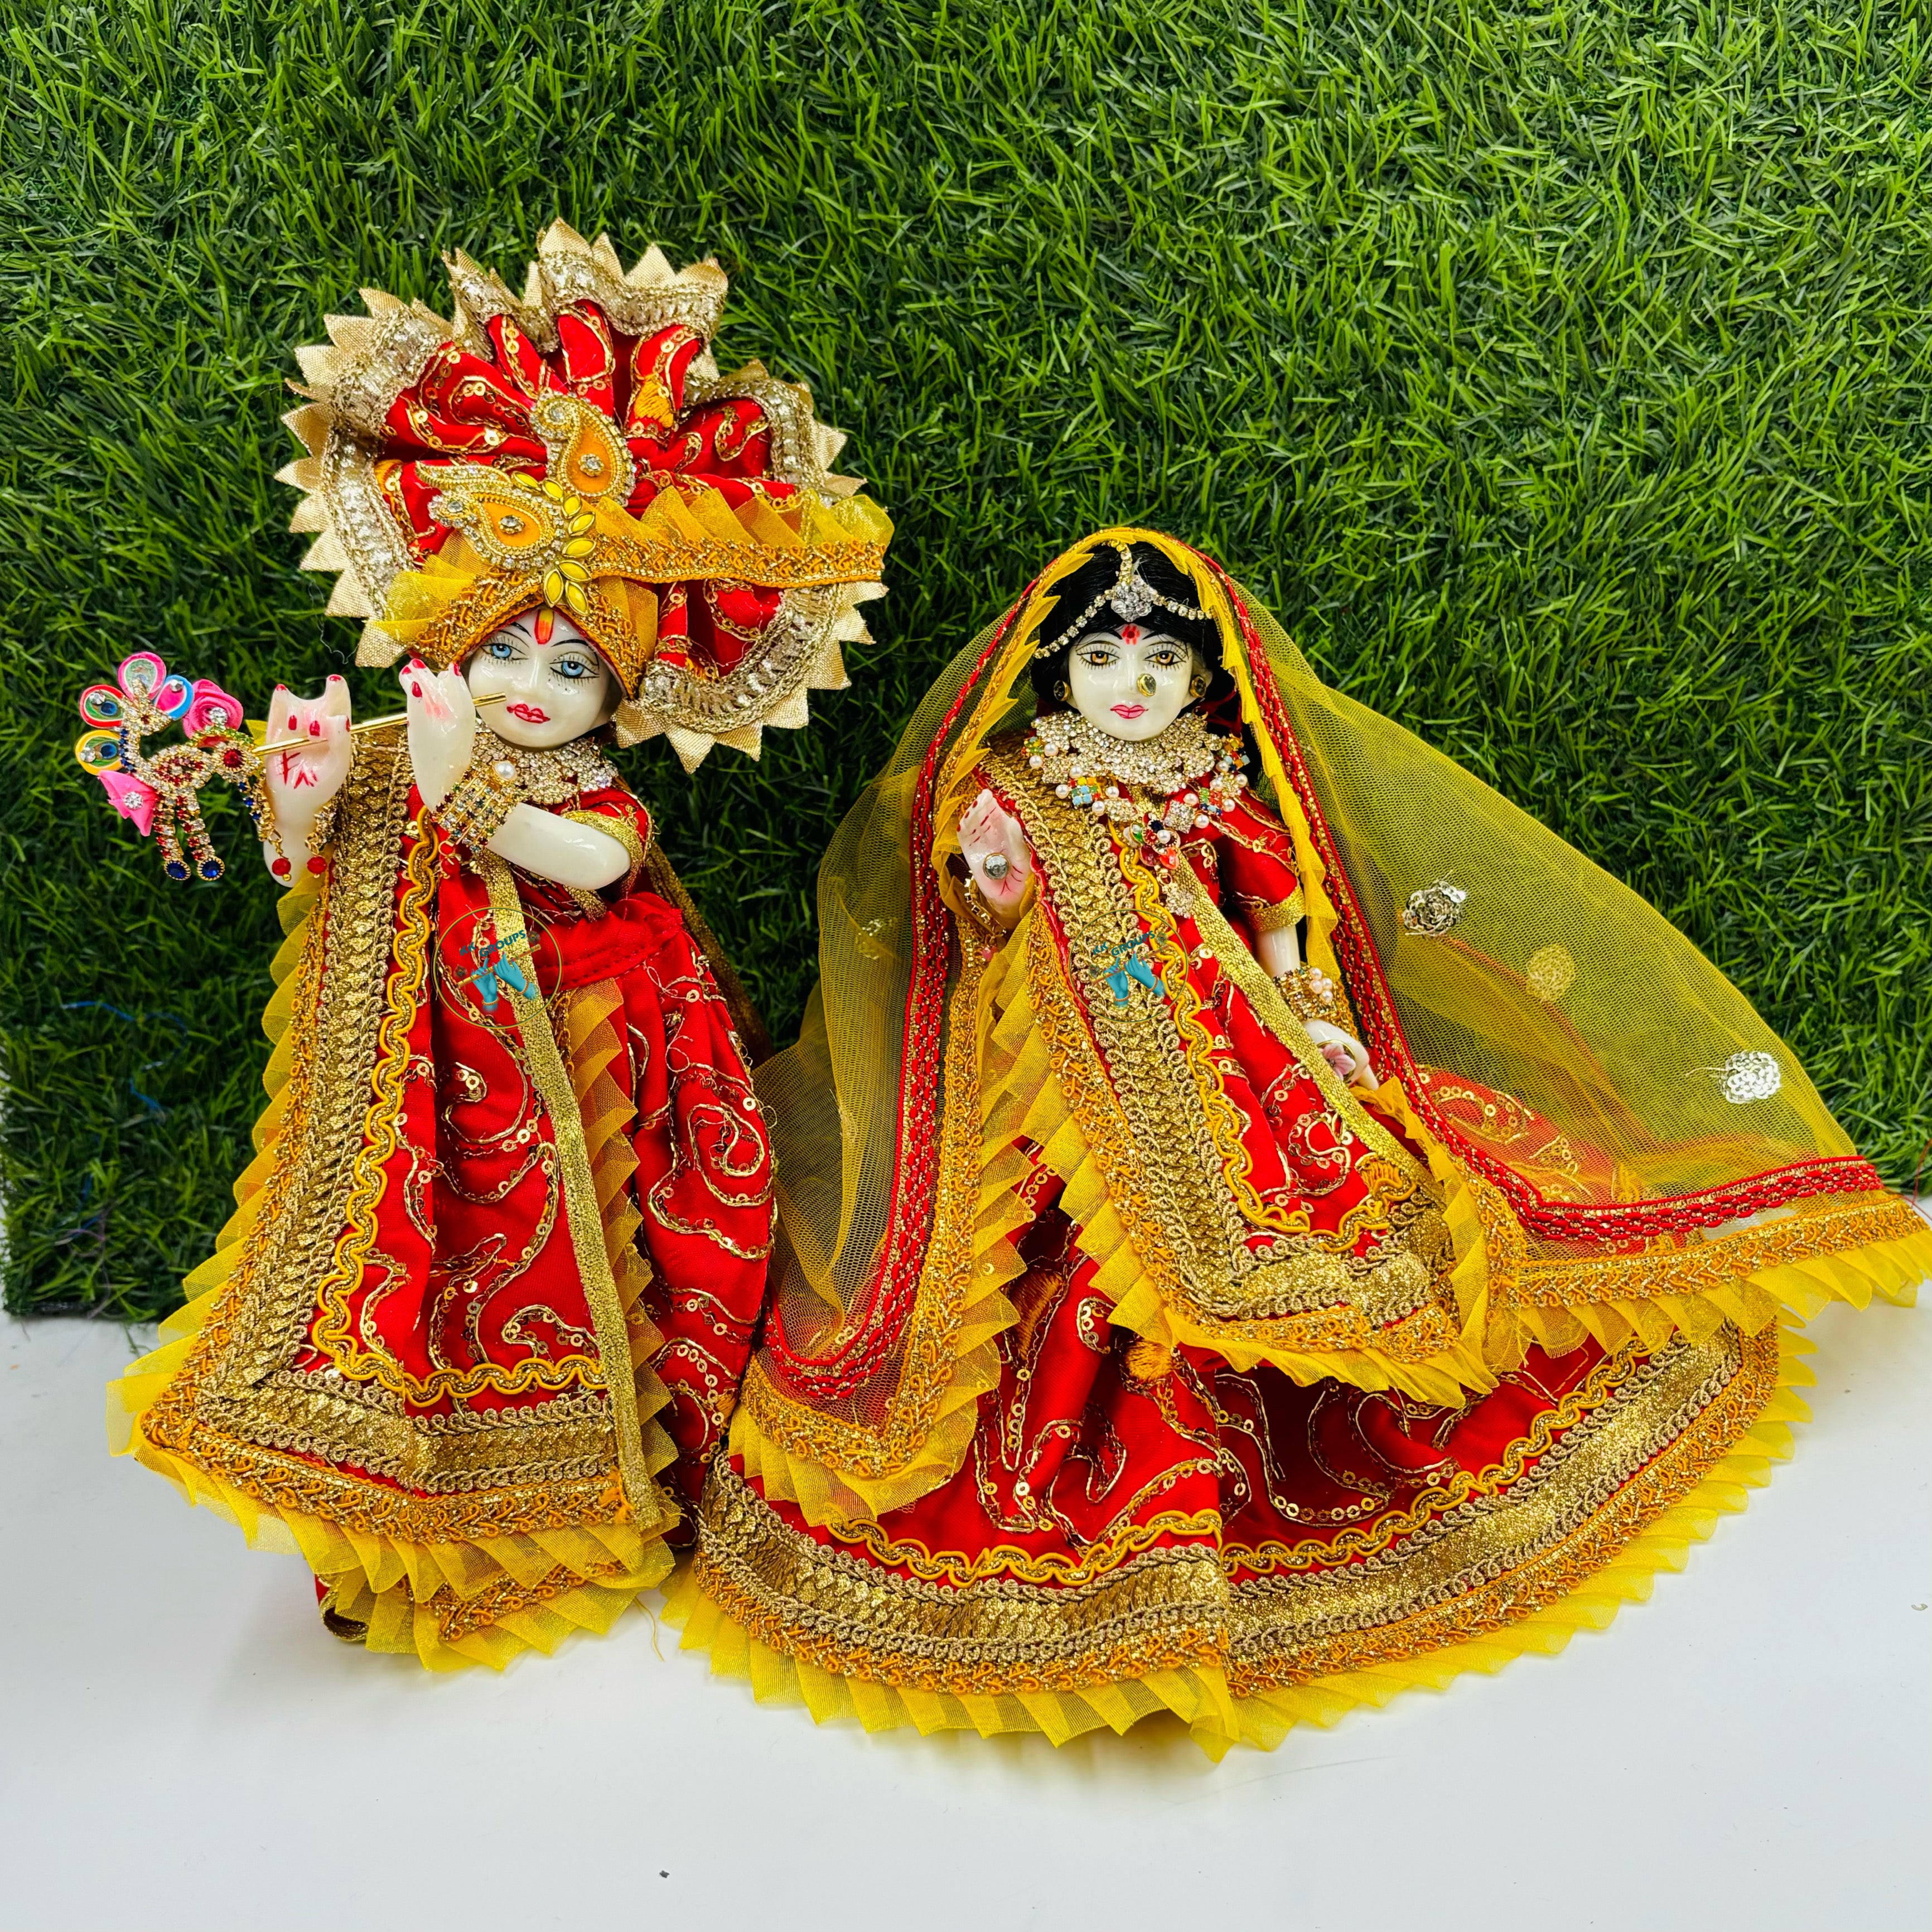 The Holy Mart Radha Krishna Dress Size 5, Krishna Dress in Crme Colour with  Jewellery and